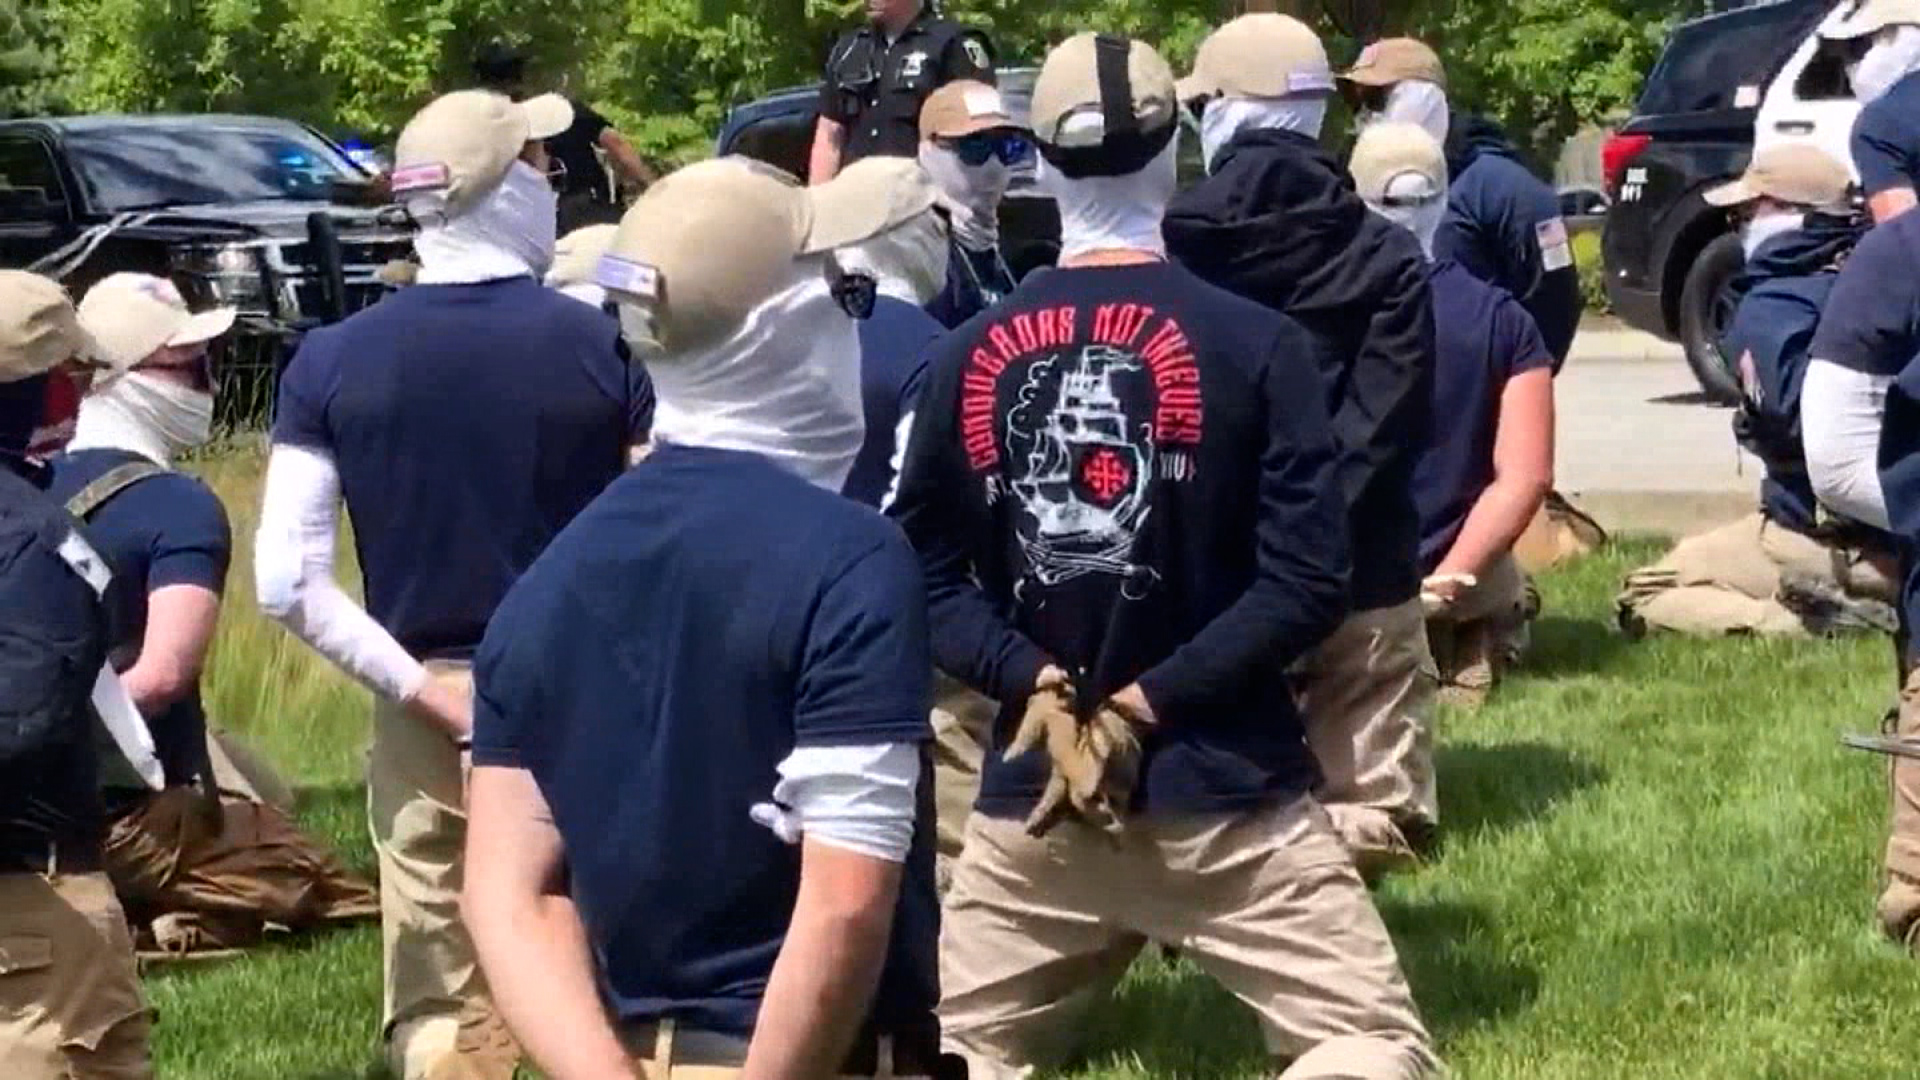 31 Suspected White Nationalists Arrested Near Idaho Pride Event